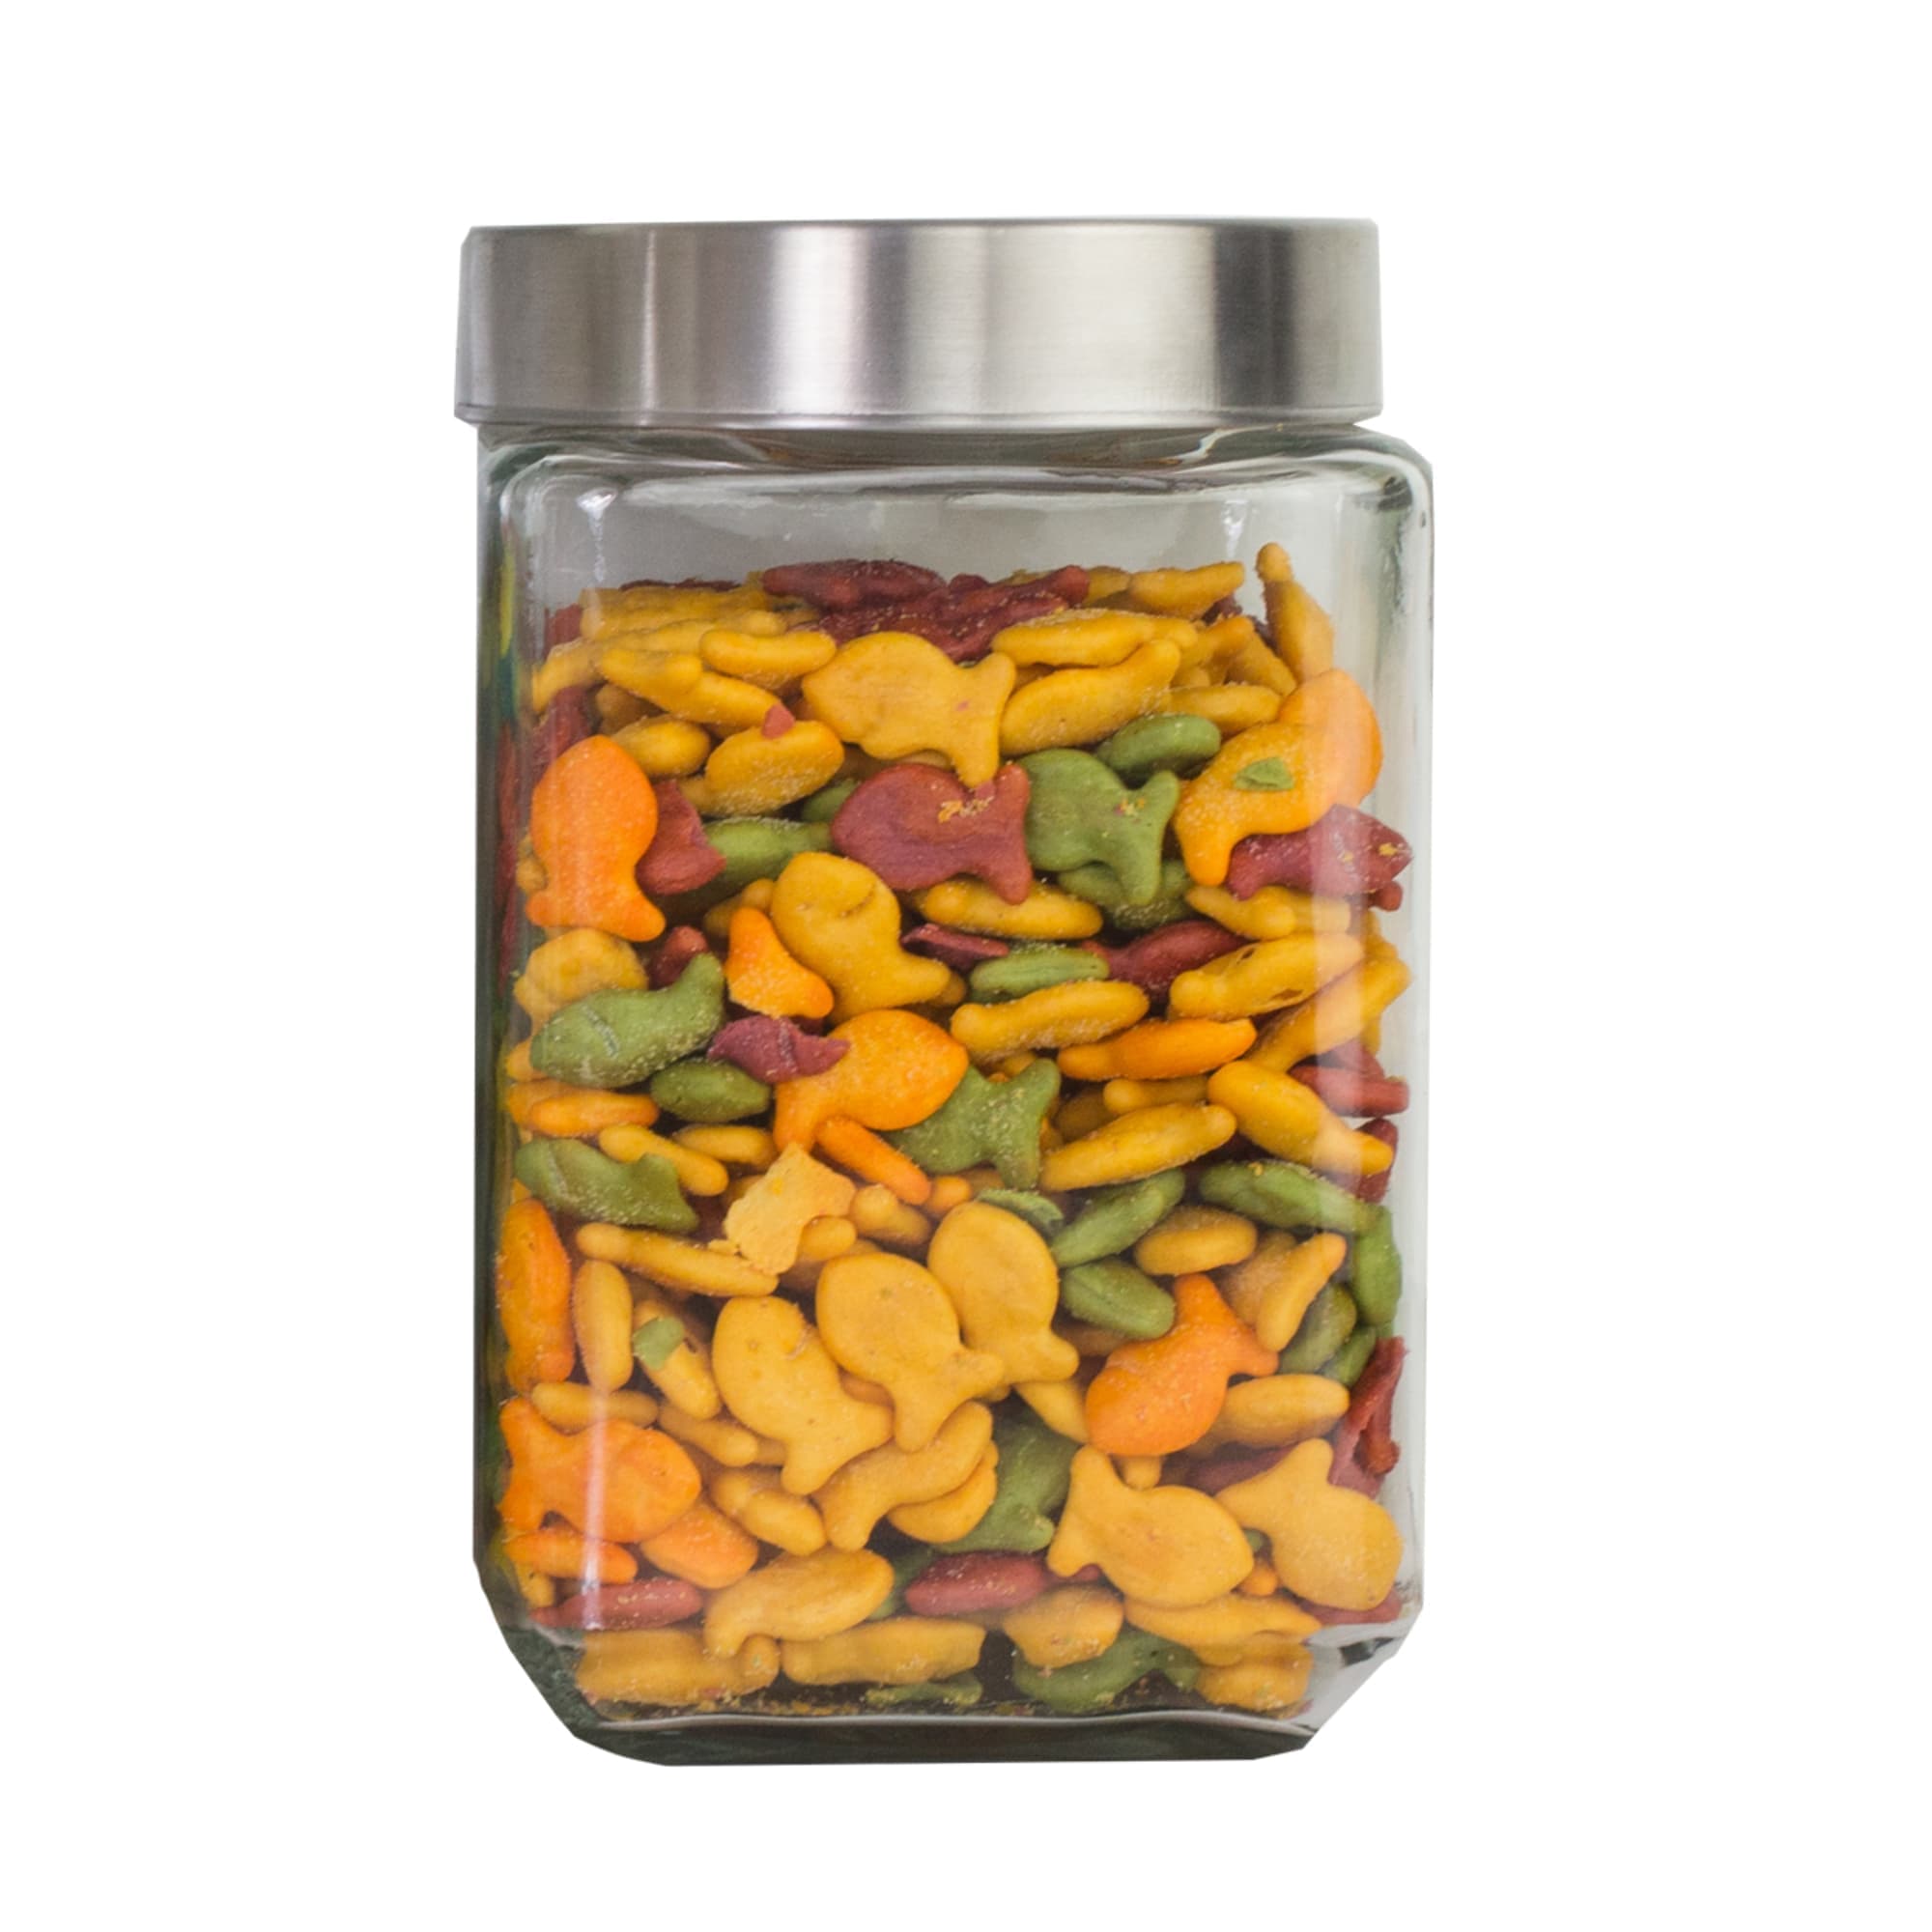 Home Basics 56 oz. Square Glass Canister with Brushed Stainless Steel Screw-on Lid Clear $3.50 EACH, CASE PACK OF 12